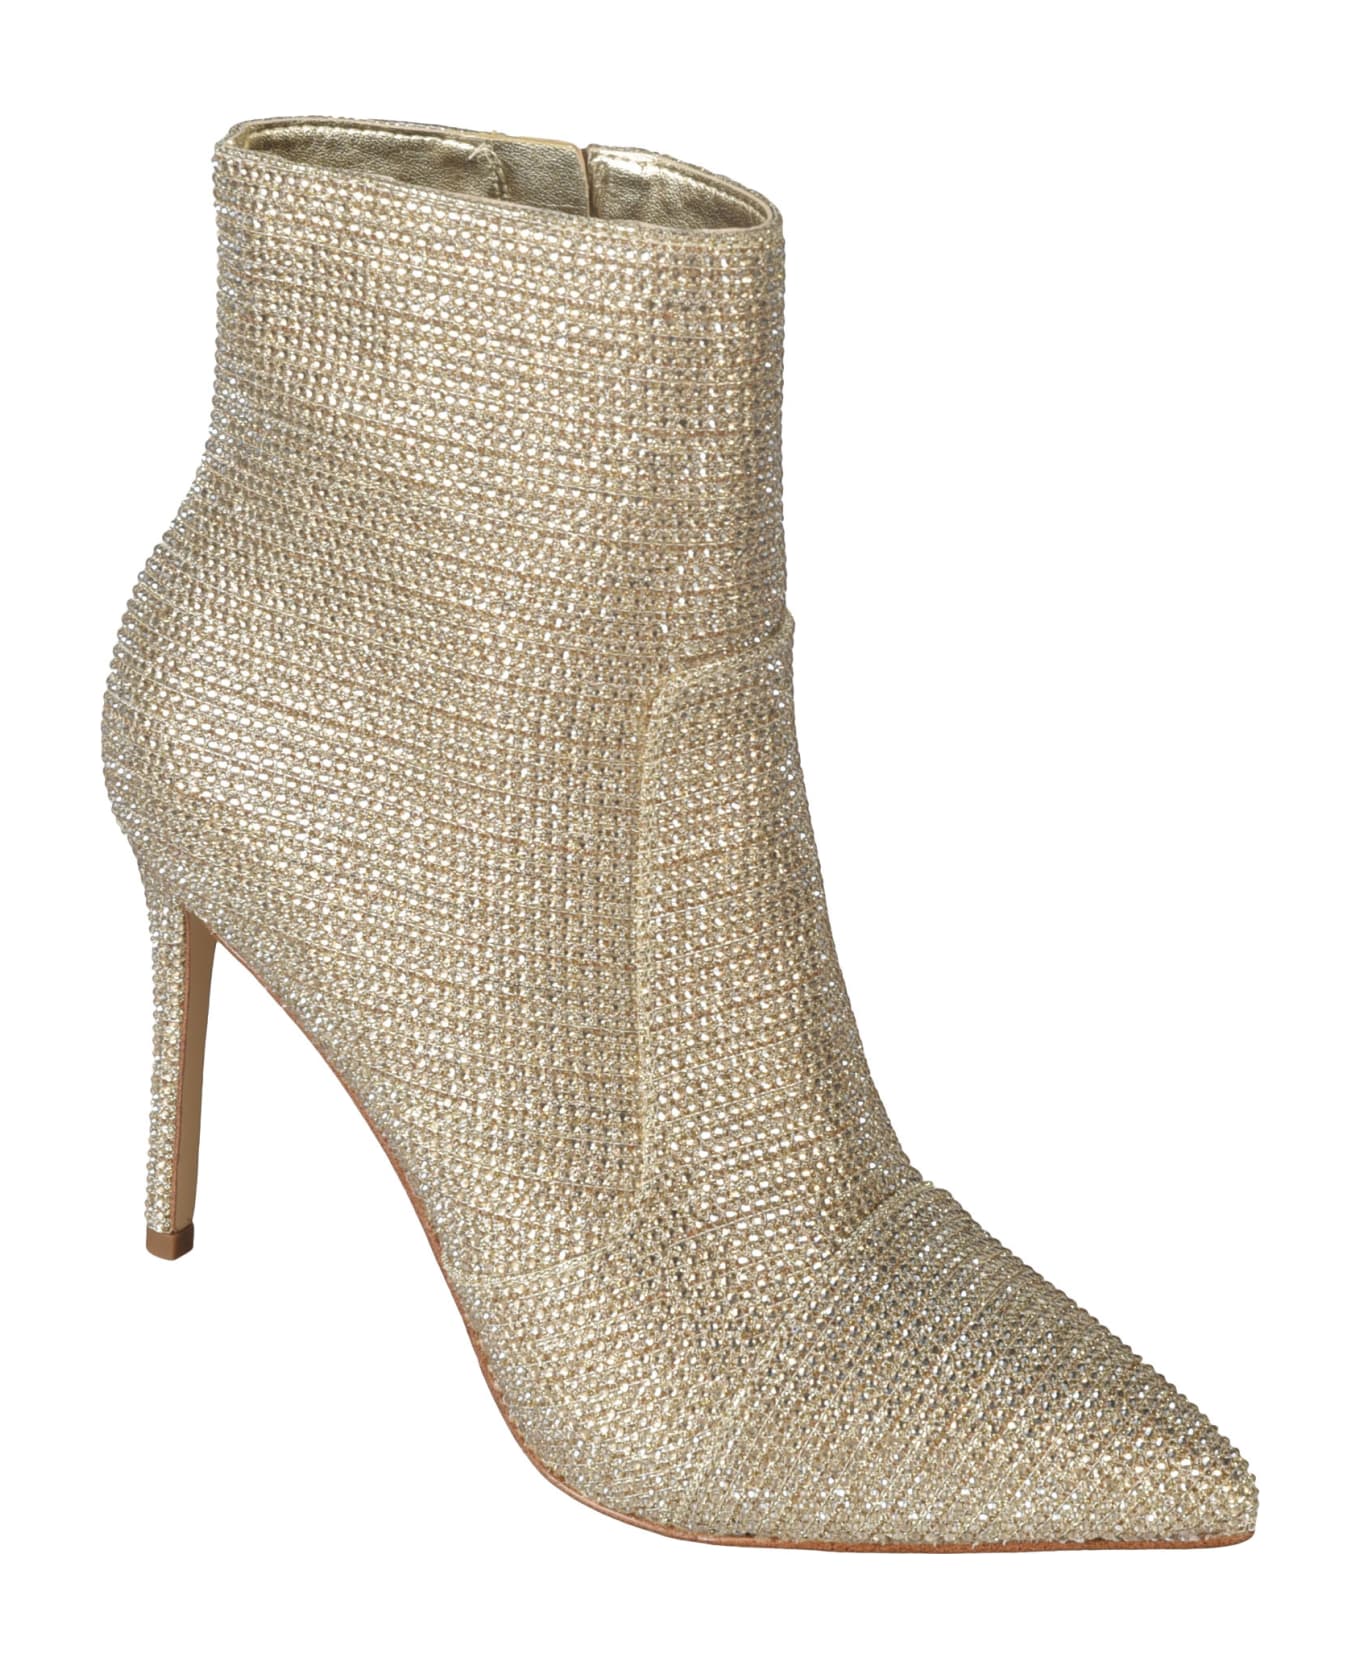 MICHAEL Michael Kors Rhinestone Embellished Side Zip Ankle Boots - Pale Gold